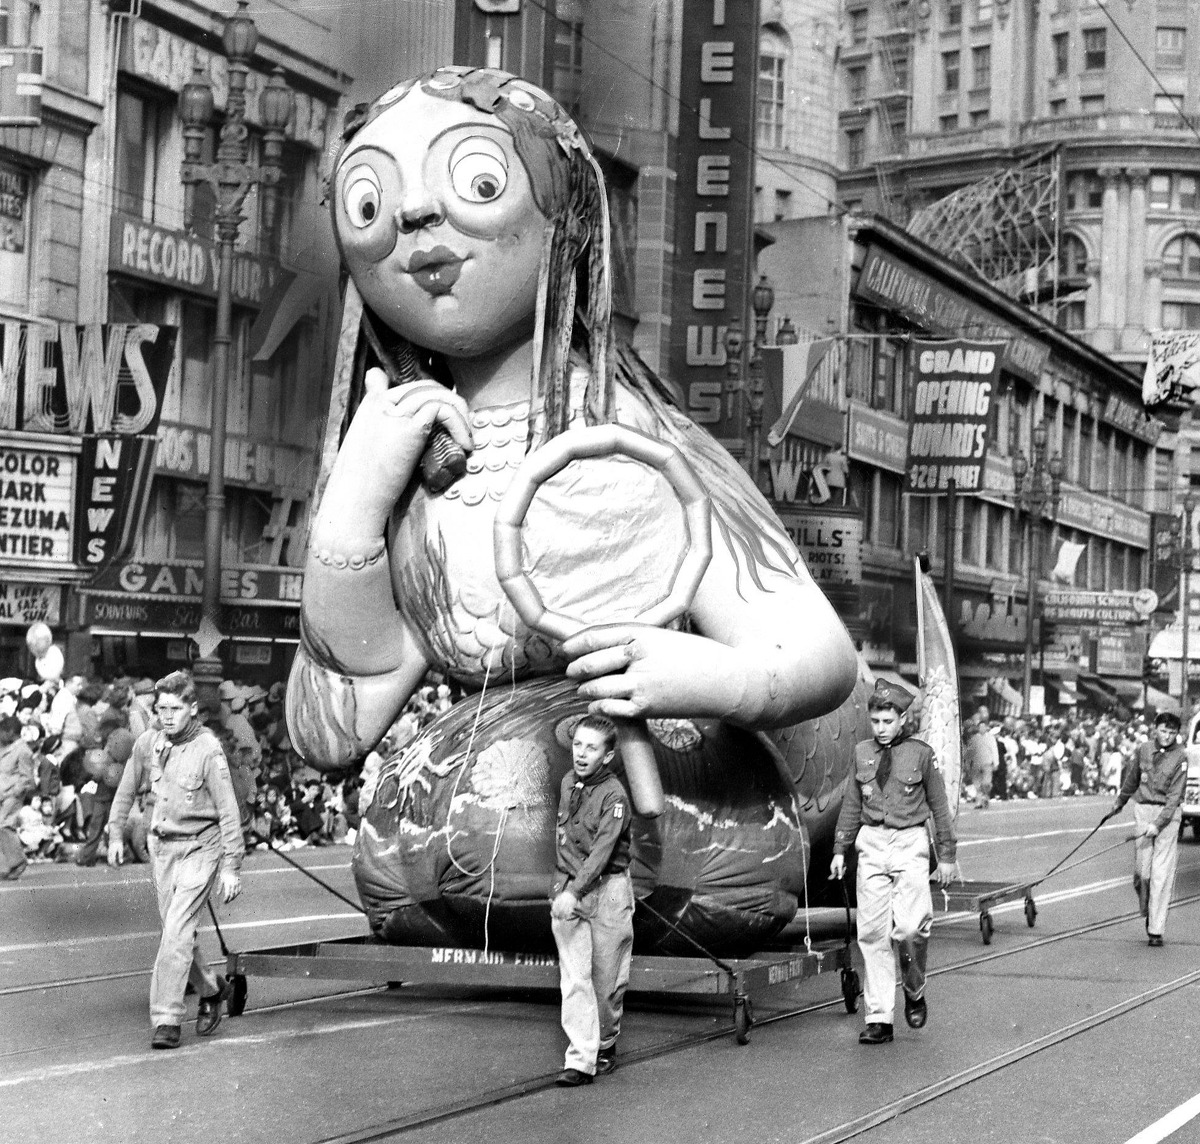 A view of a float on Market Street during the 1953 San Francisco Chronicle Thanksgiving Balloon Parade.